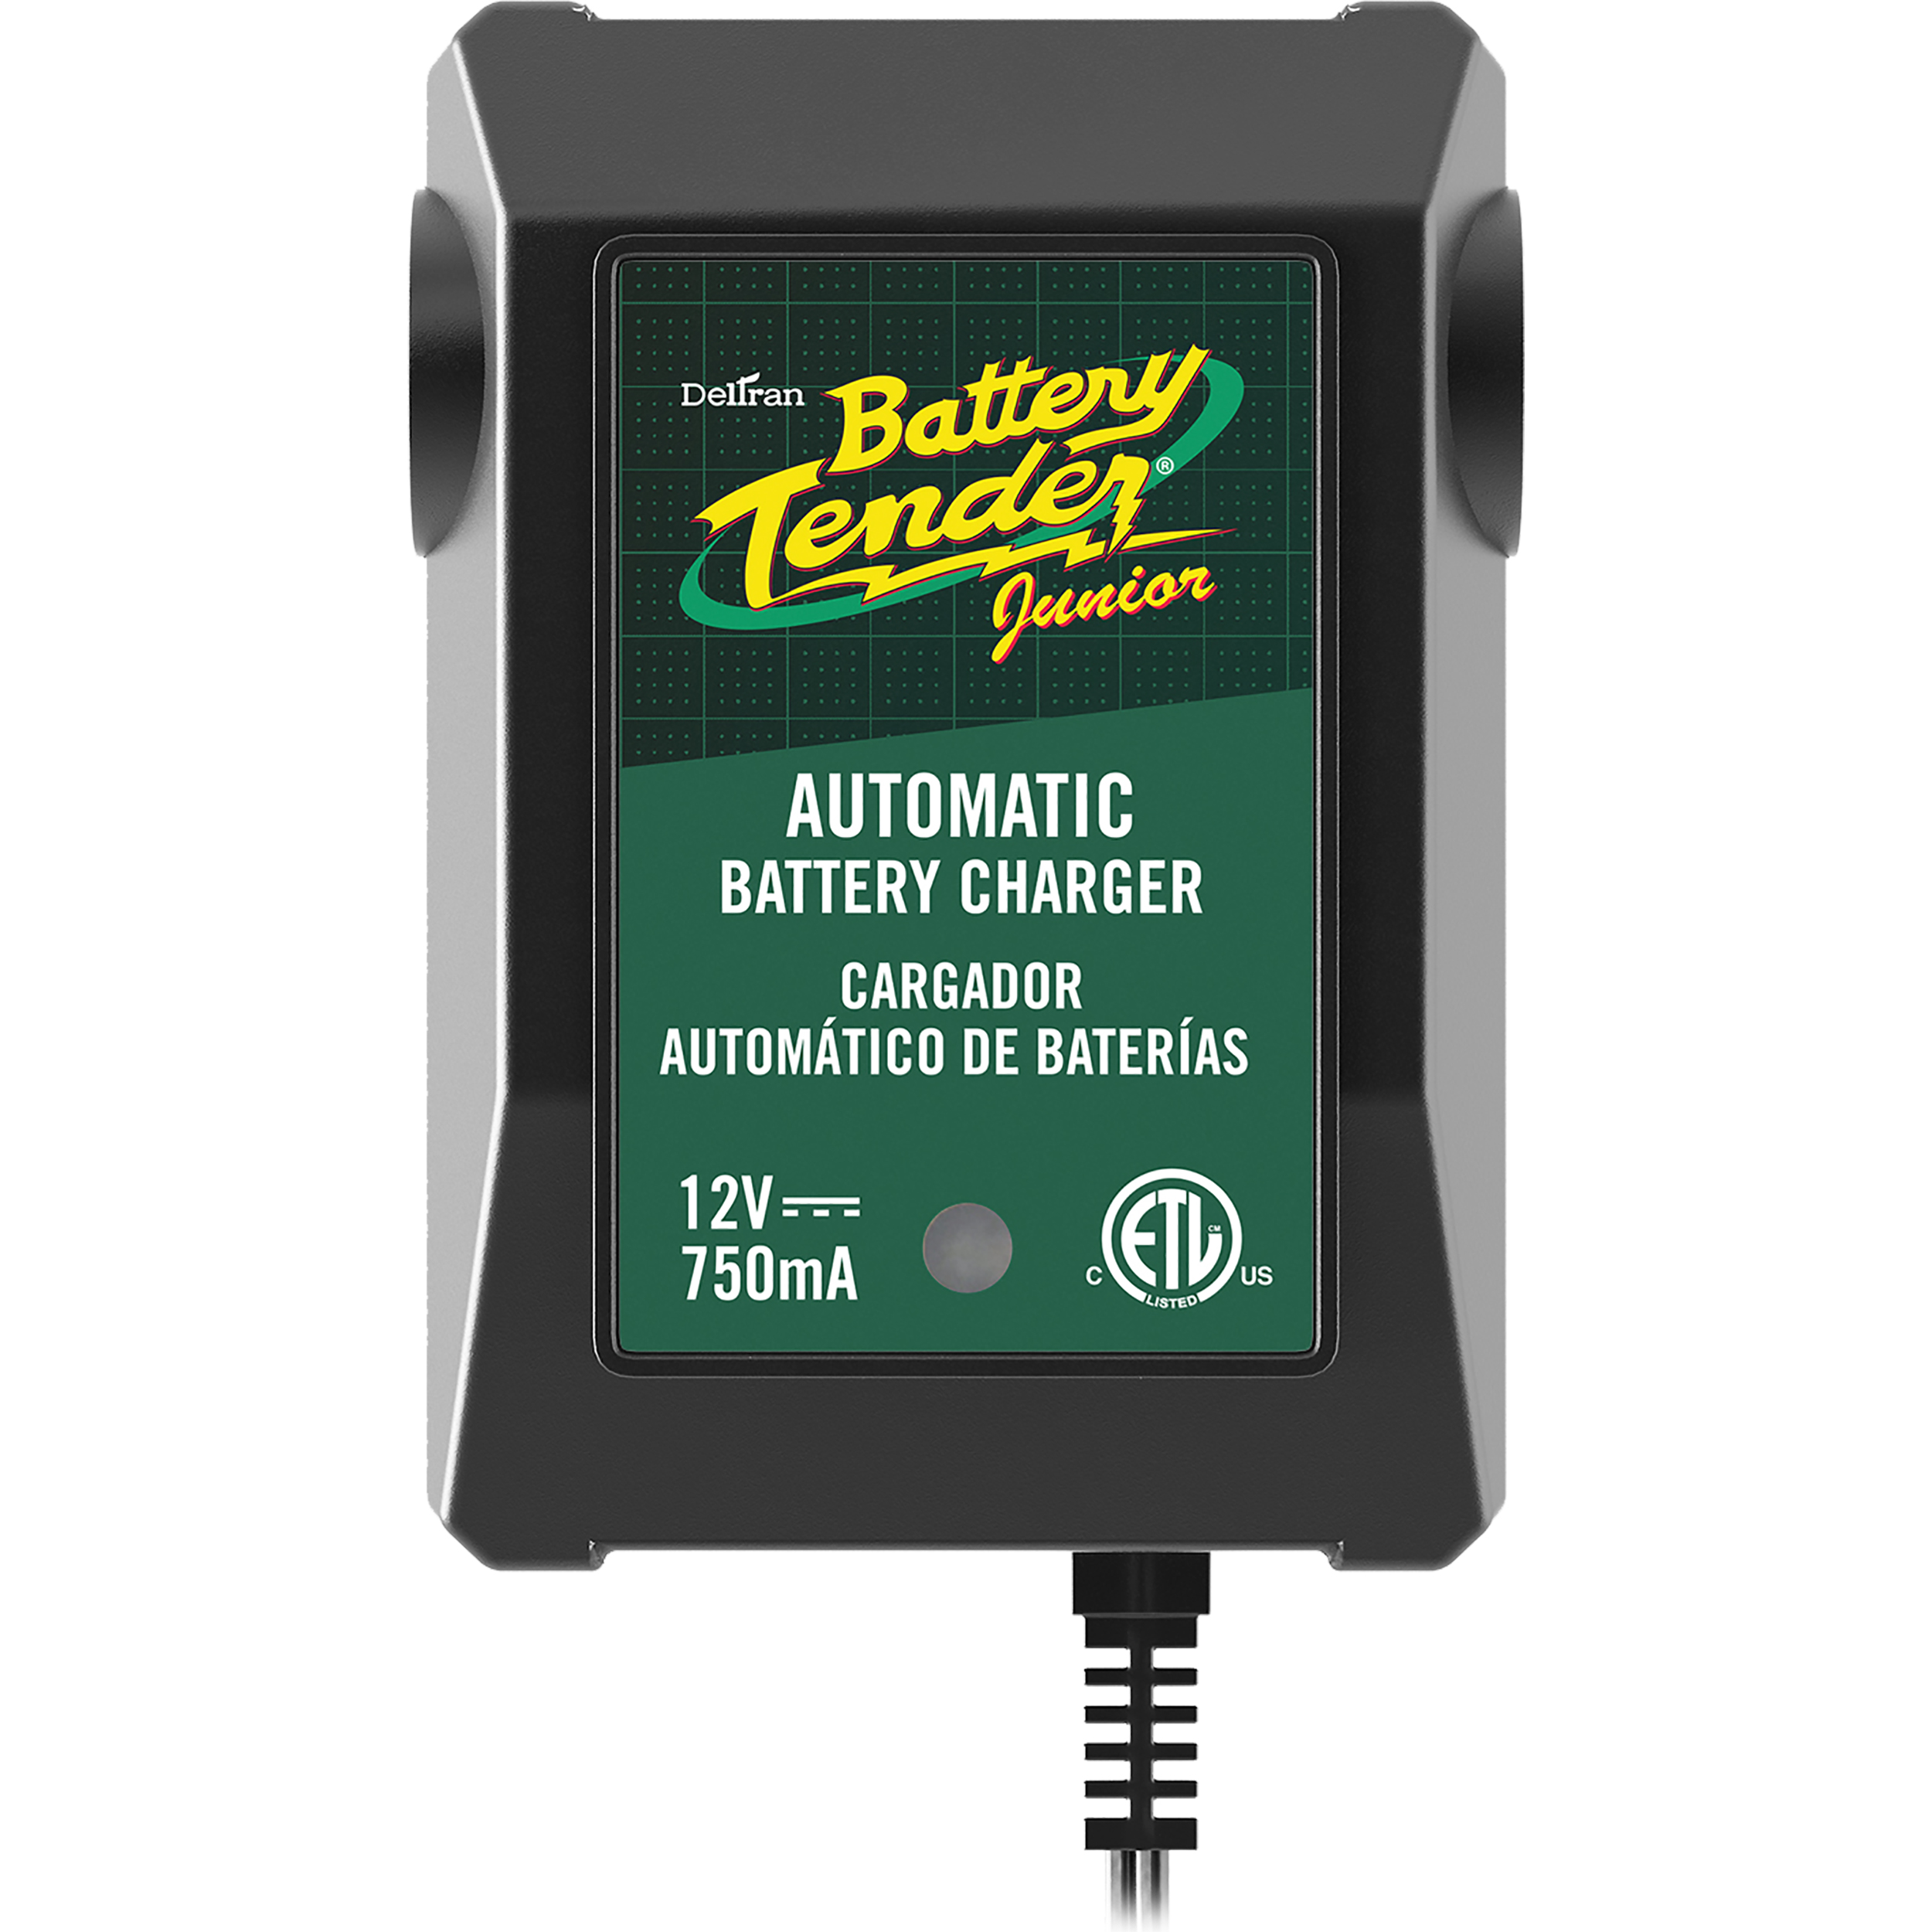 Buying the Right Battery Charger